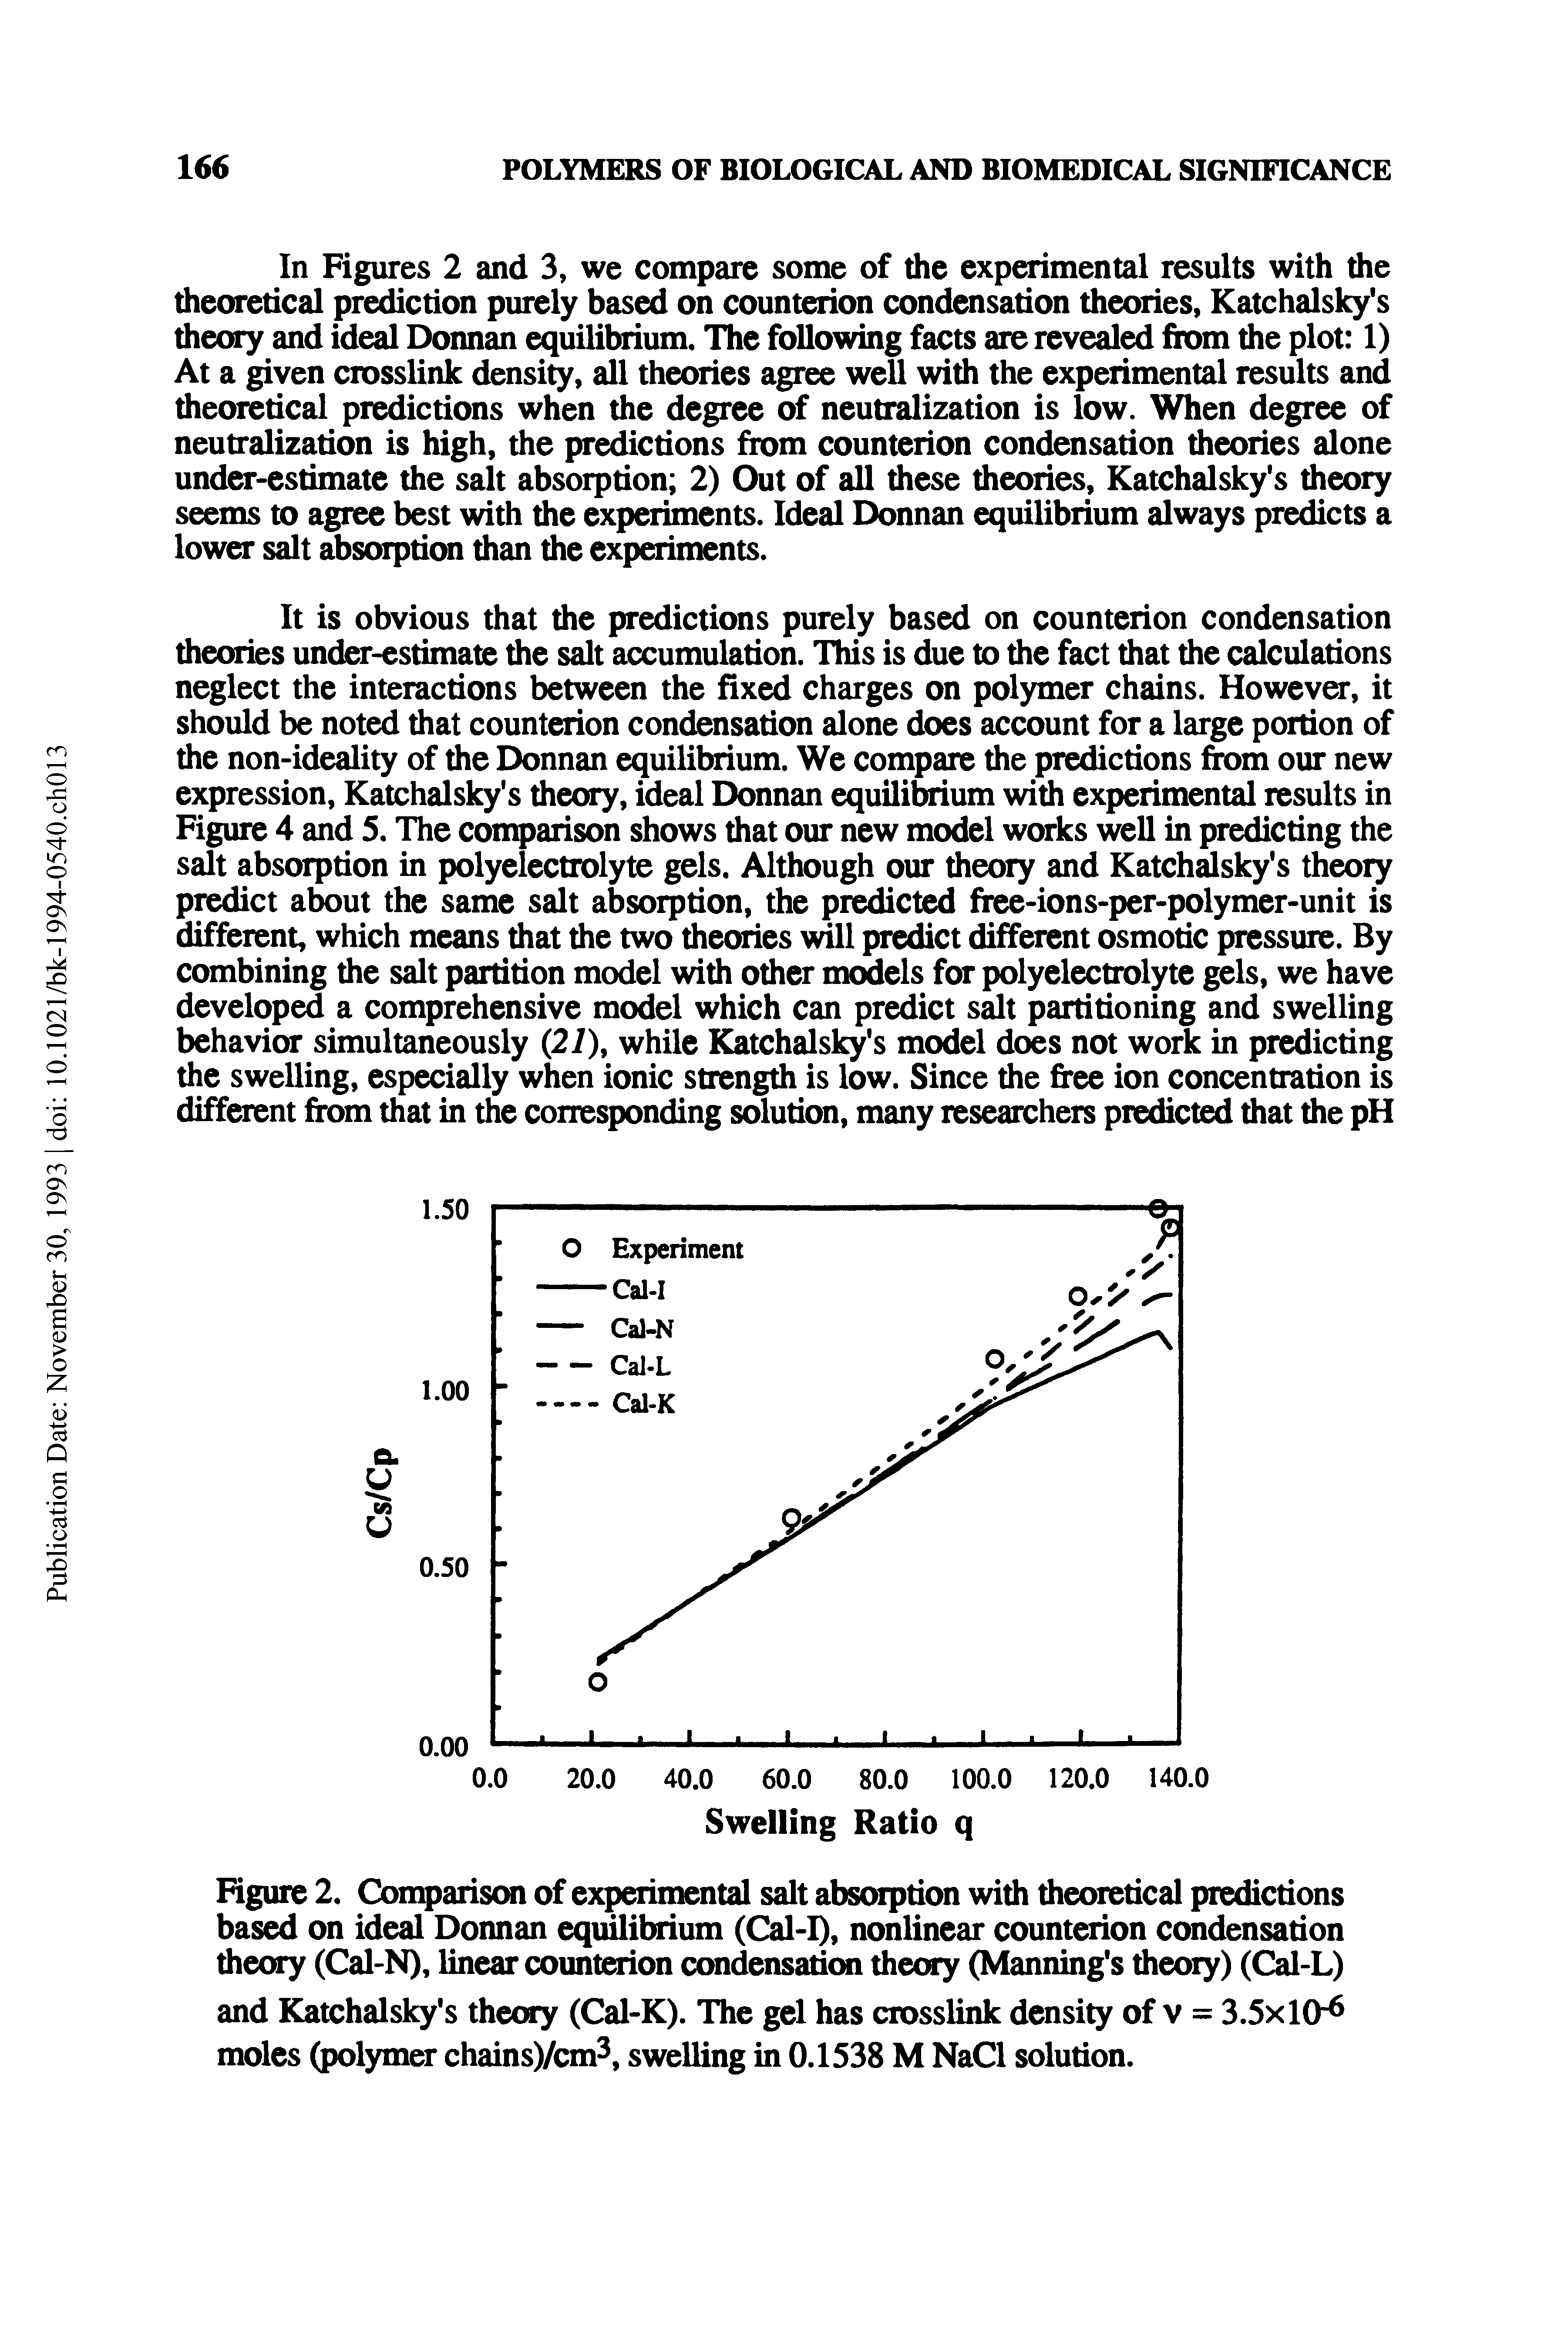 Figure 2. Conq)arison of experimental salt absorption with theoretical predictions based on ideal Donnan equUibrium (Cal-I), nonlinear counterion condensation theory (Cal-N), linear counterion condensation theory (Manning s theory) (Cal-L)...